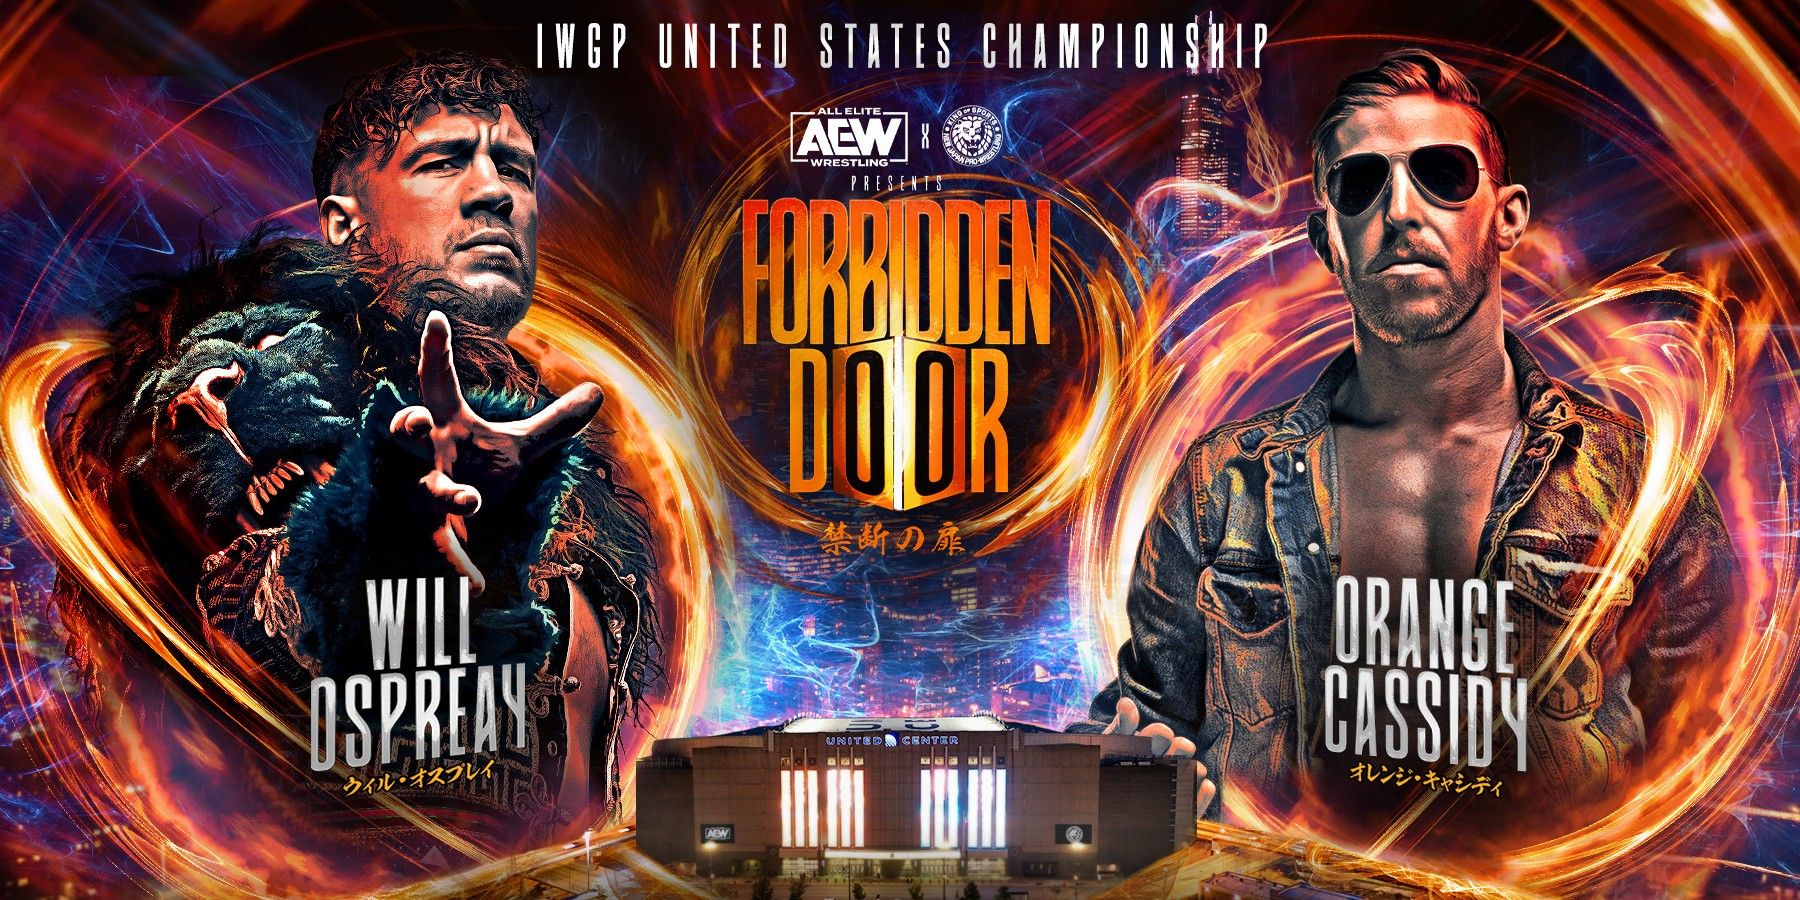 Will Ospreay and Orange Cassidy Forbidden Door graphic